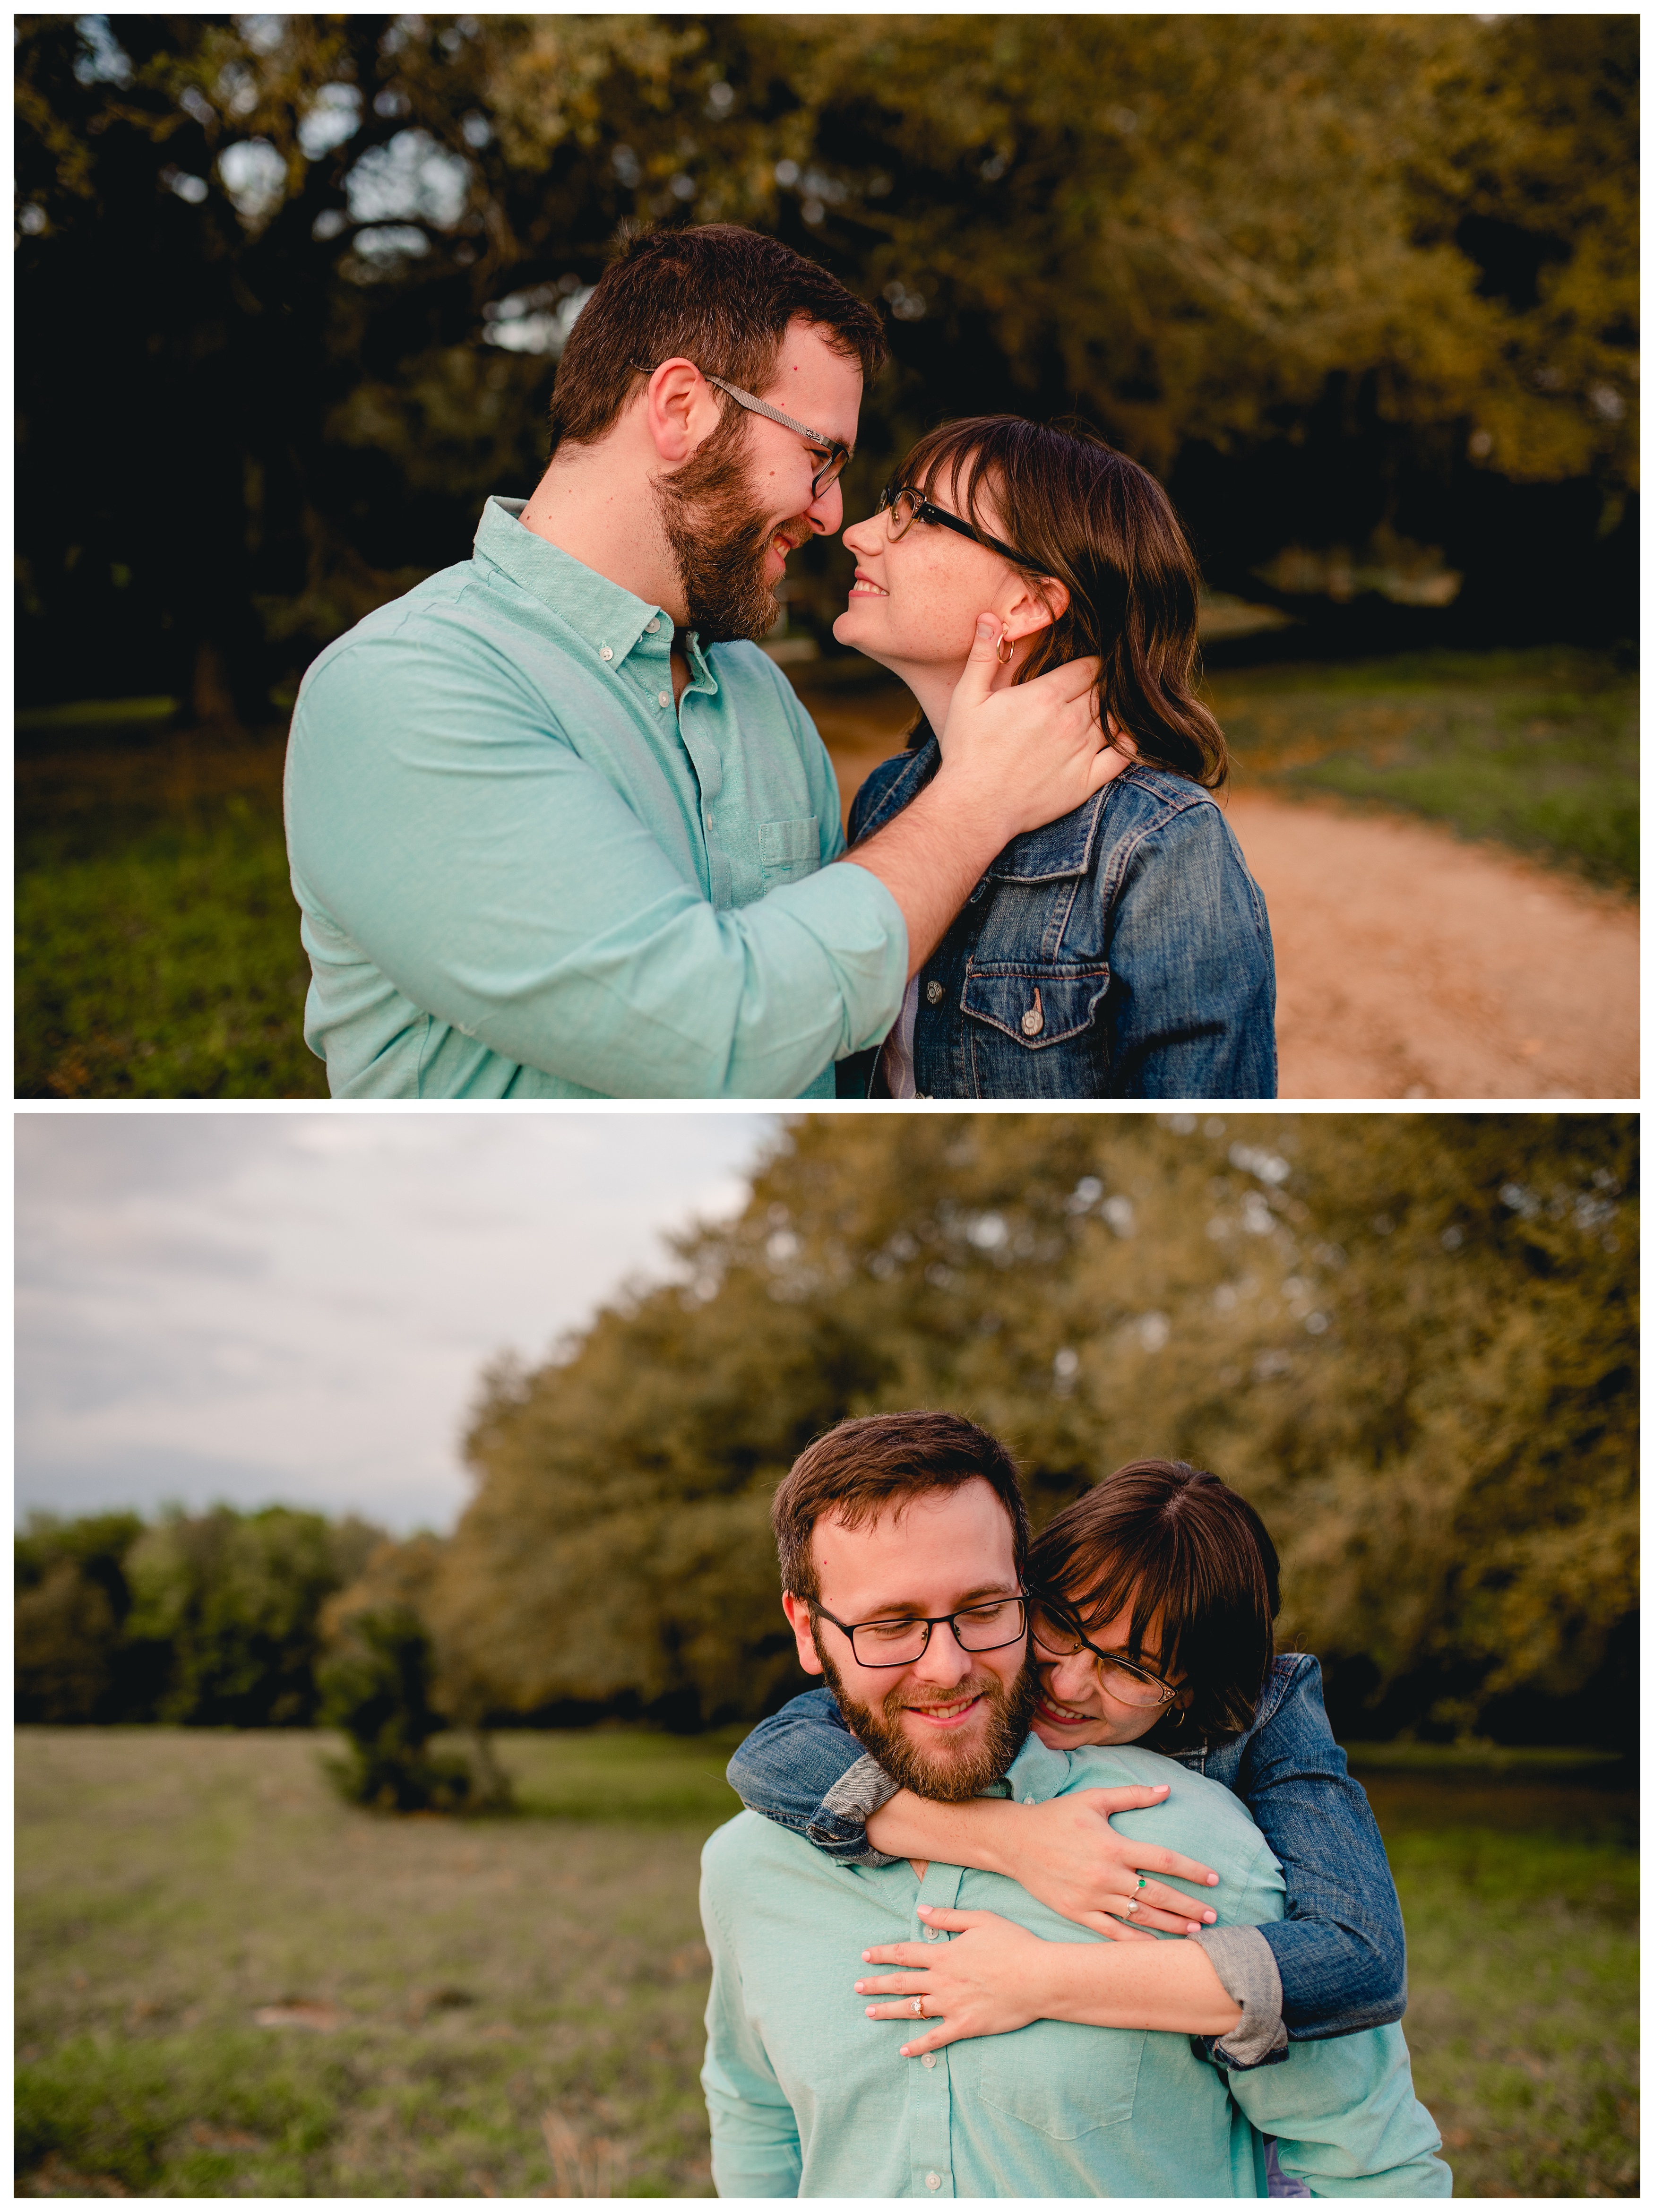 Engagement sessions made fun by Tallahassee wedding photographer. Shelly Williams Photography